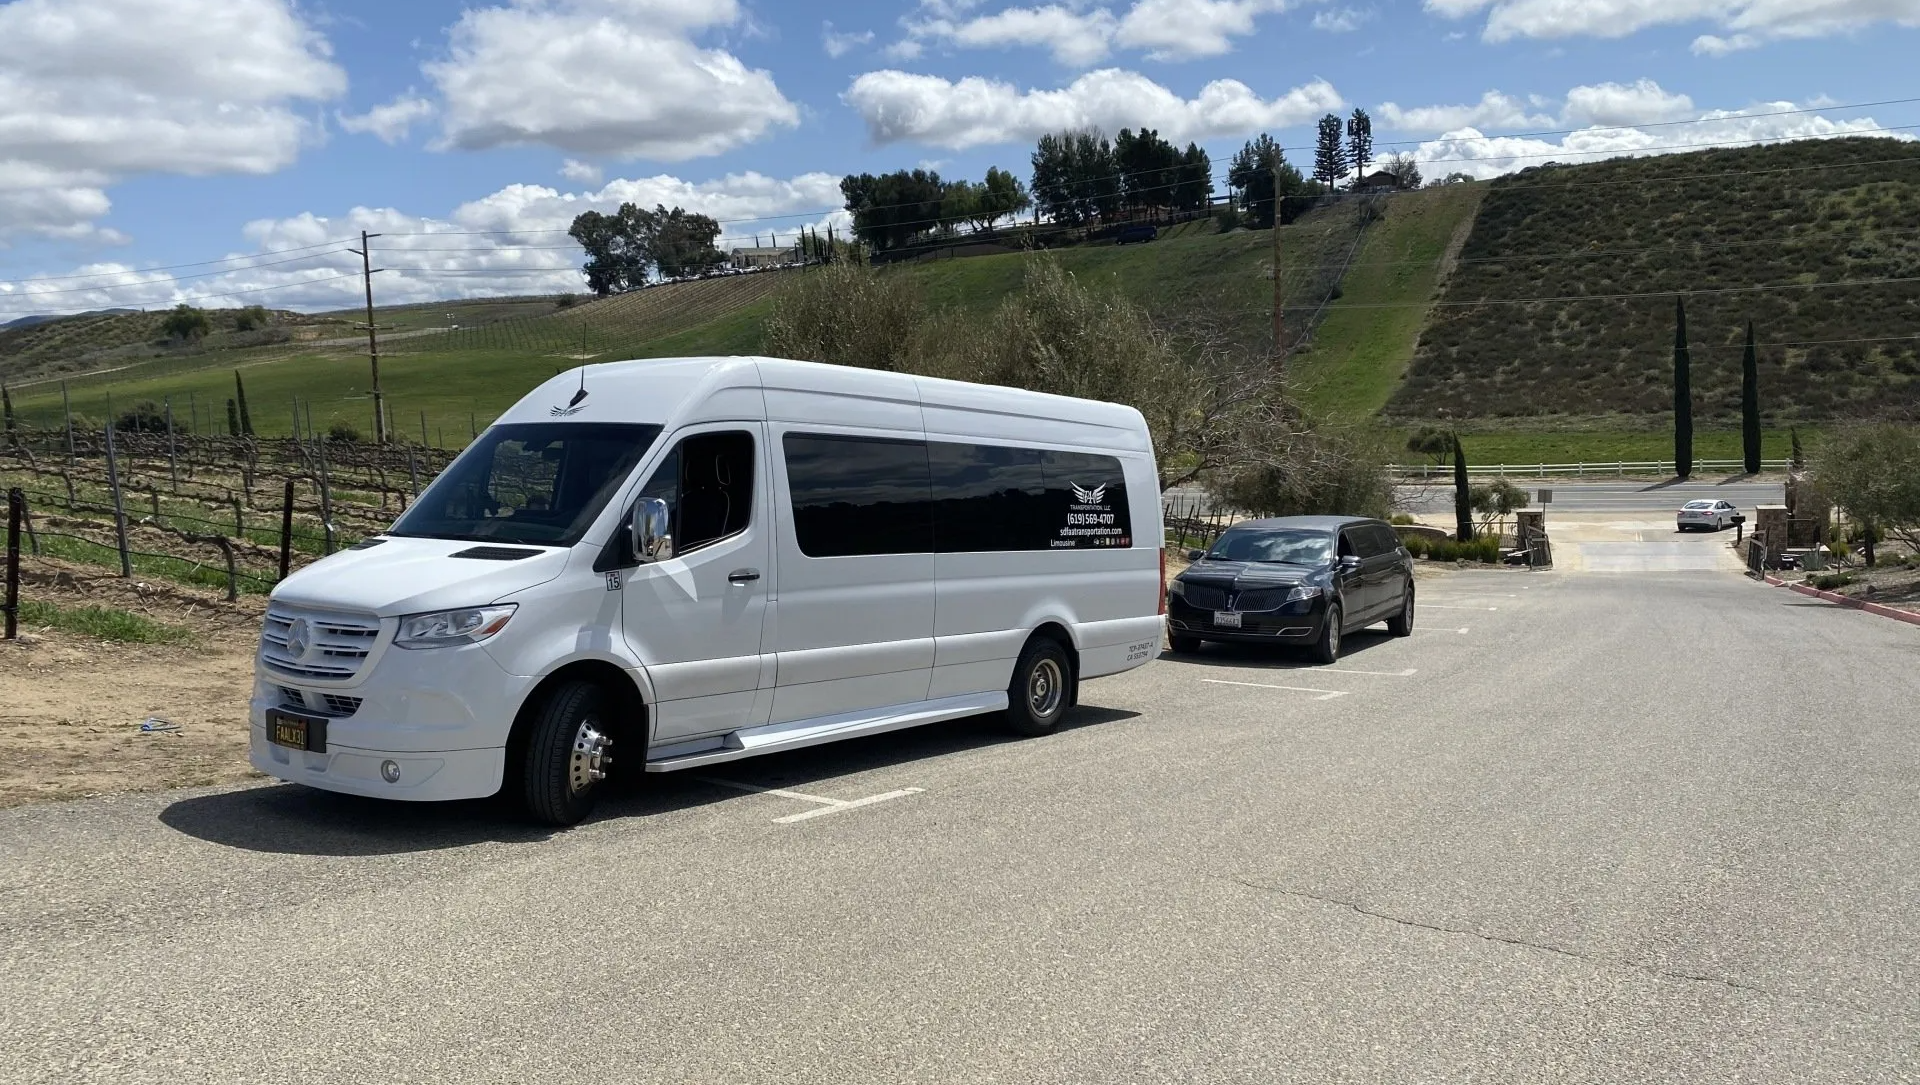 a white van is parked on the side of the road next to a black car .